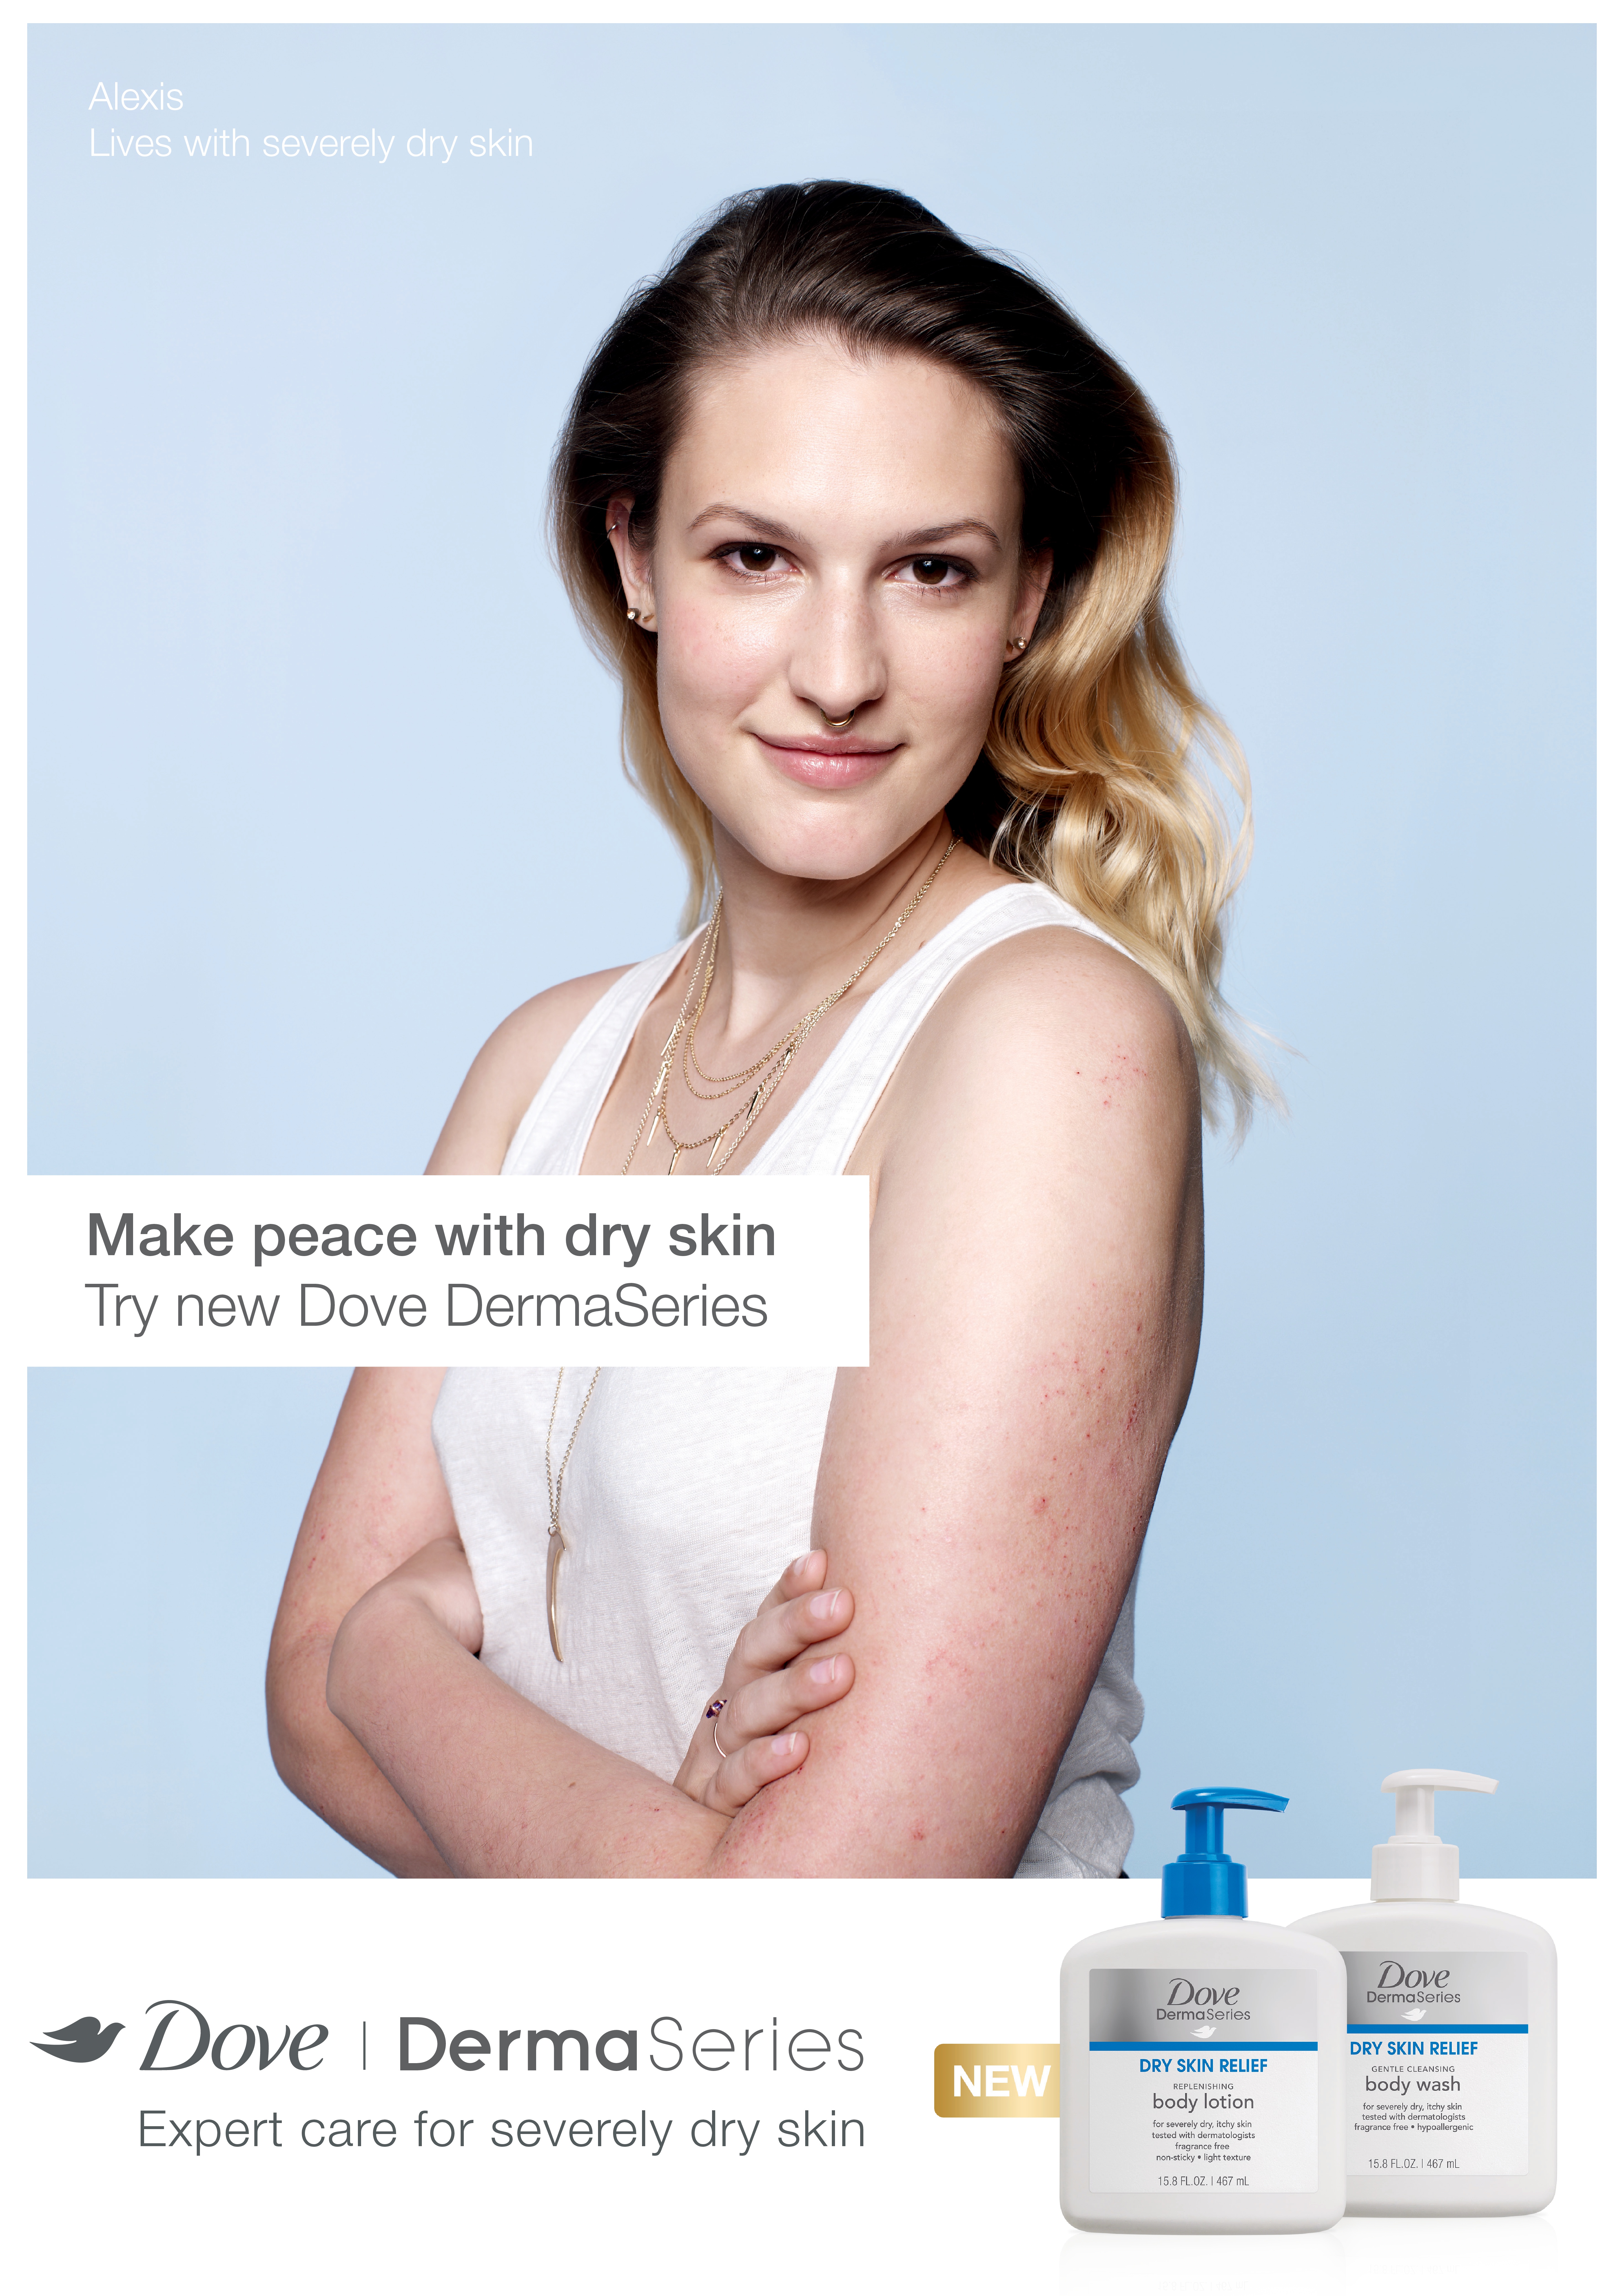 Alexis from Dove DermaSeries campaign